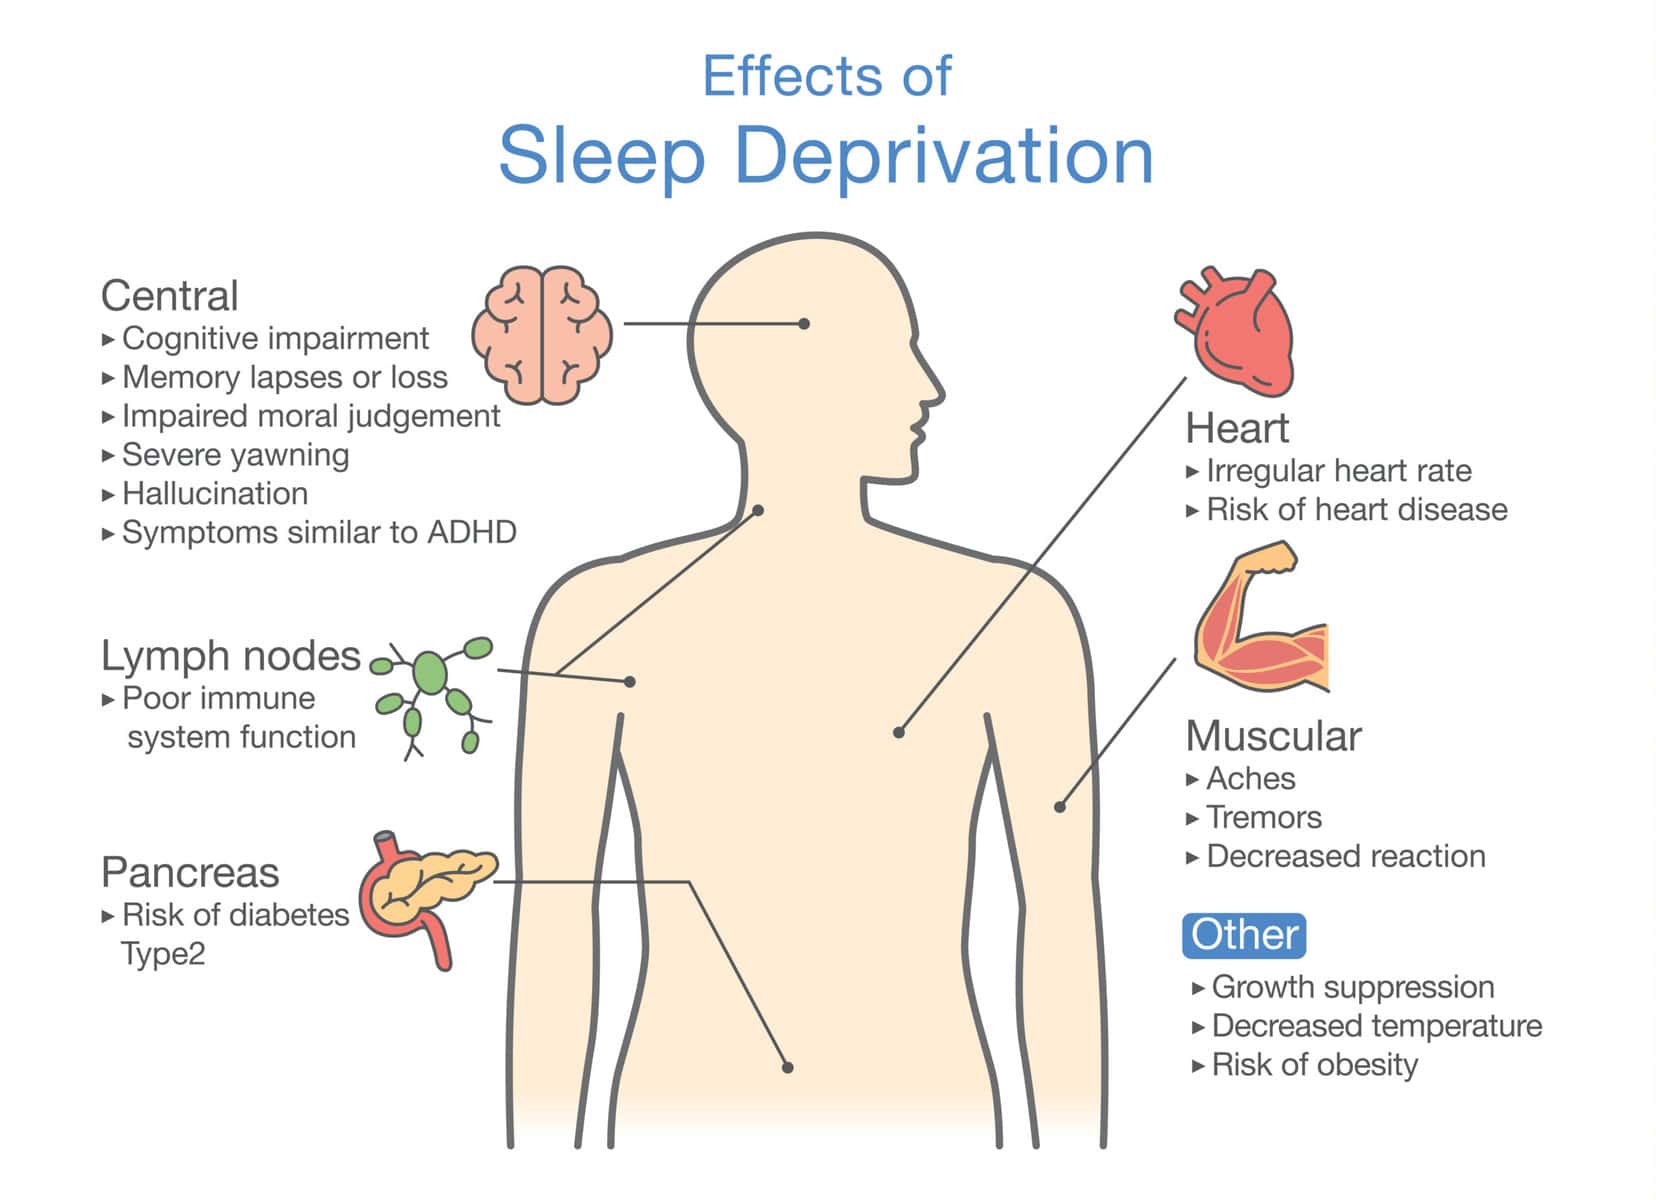 Diagram of Effects of Sleep deprivation.